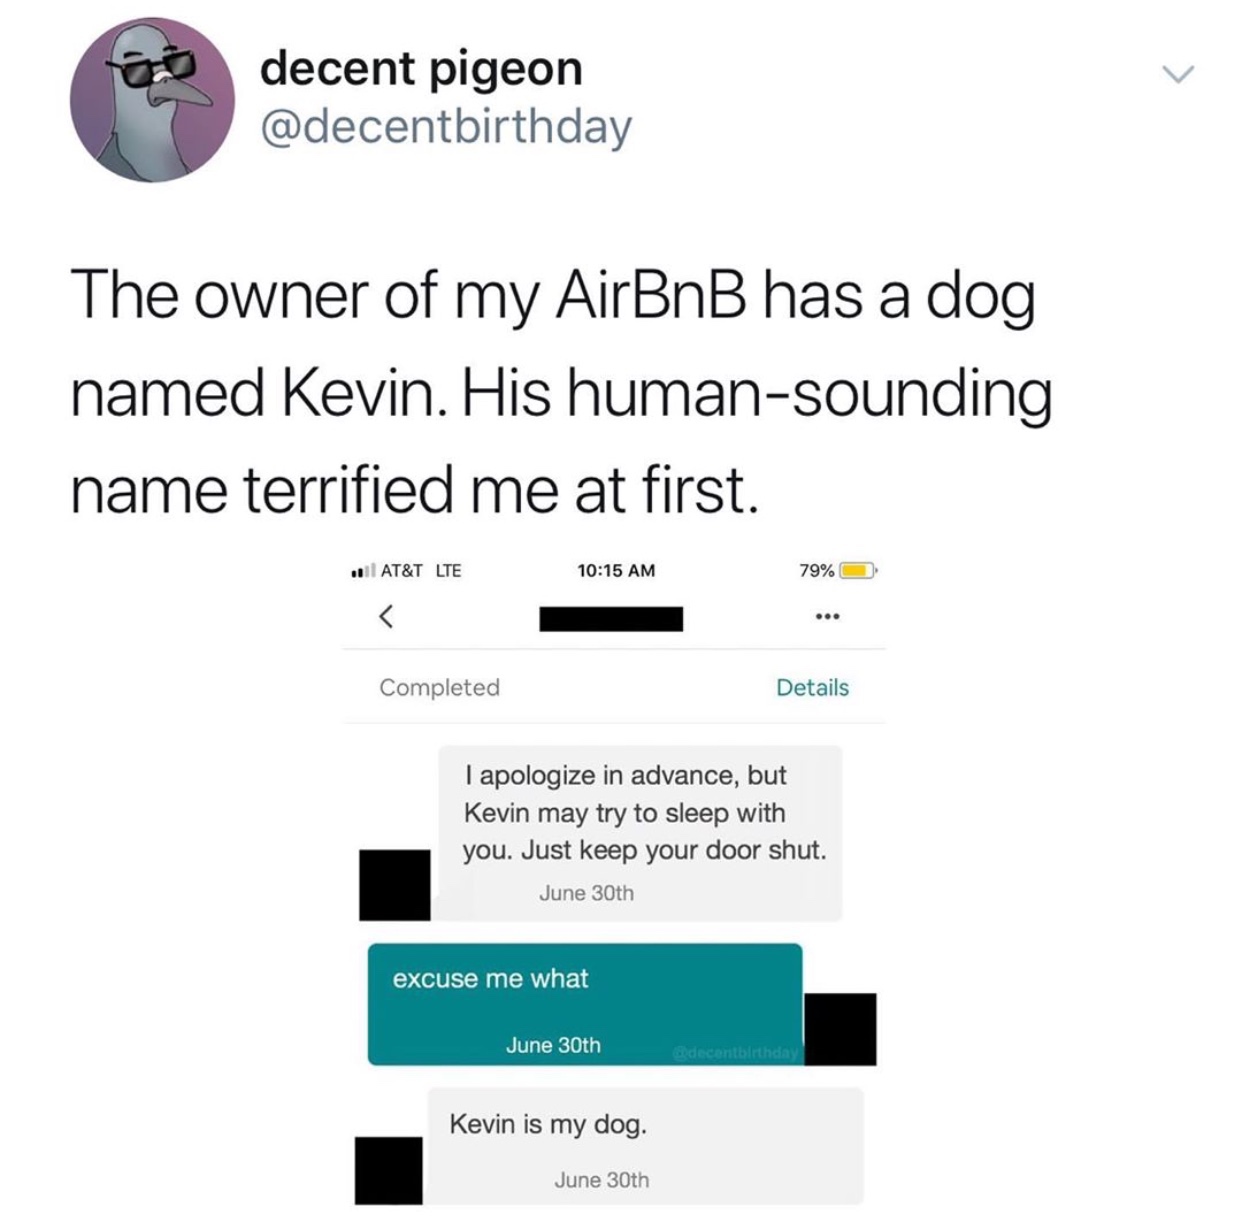 media - decent pigeon The owner of my AirBnB has a dog named Kevin. His humansounding name terrified me at first. ... At&T Lte 79% O Completed Details I apologize in advance, but Kevin may try to sleep with you. Just keep your door shut. June 30th excuse 